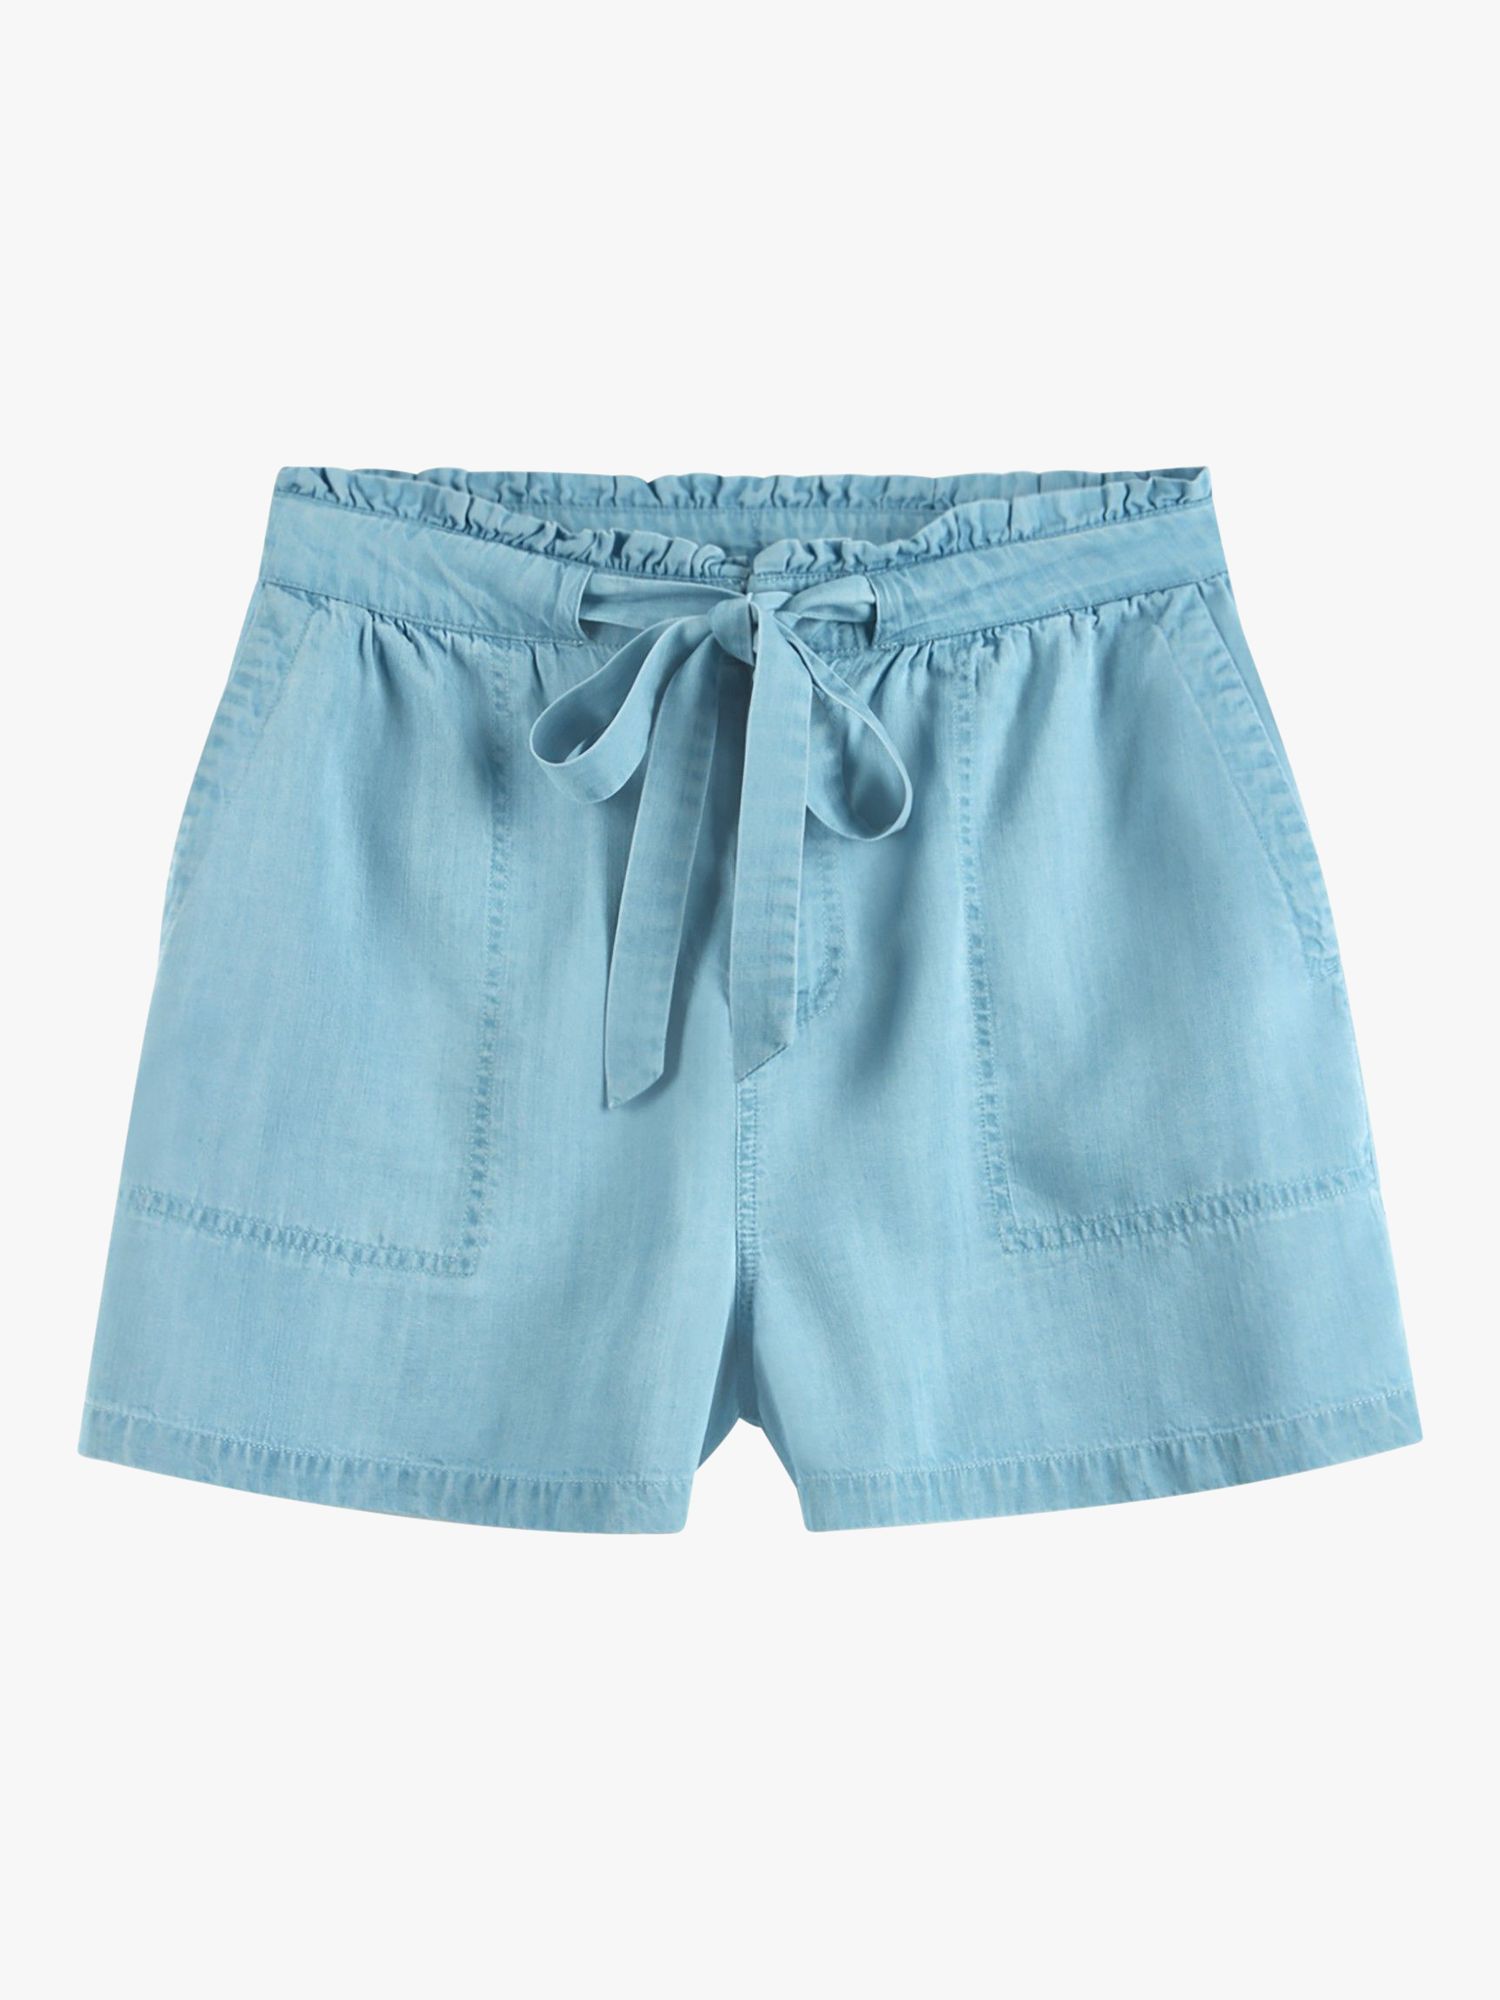 Buy HUSH Chambray Shorts, Light Blue Authentic Online at johnlewis.com